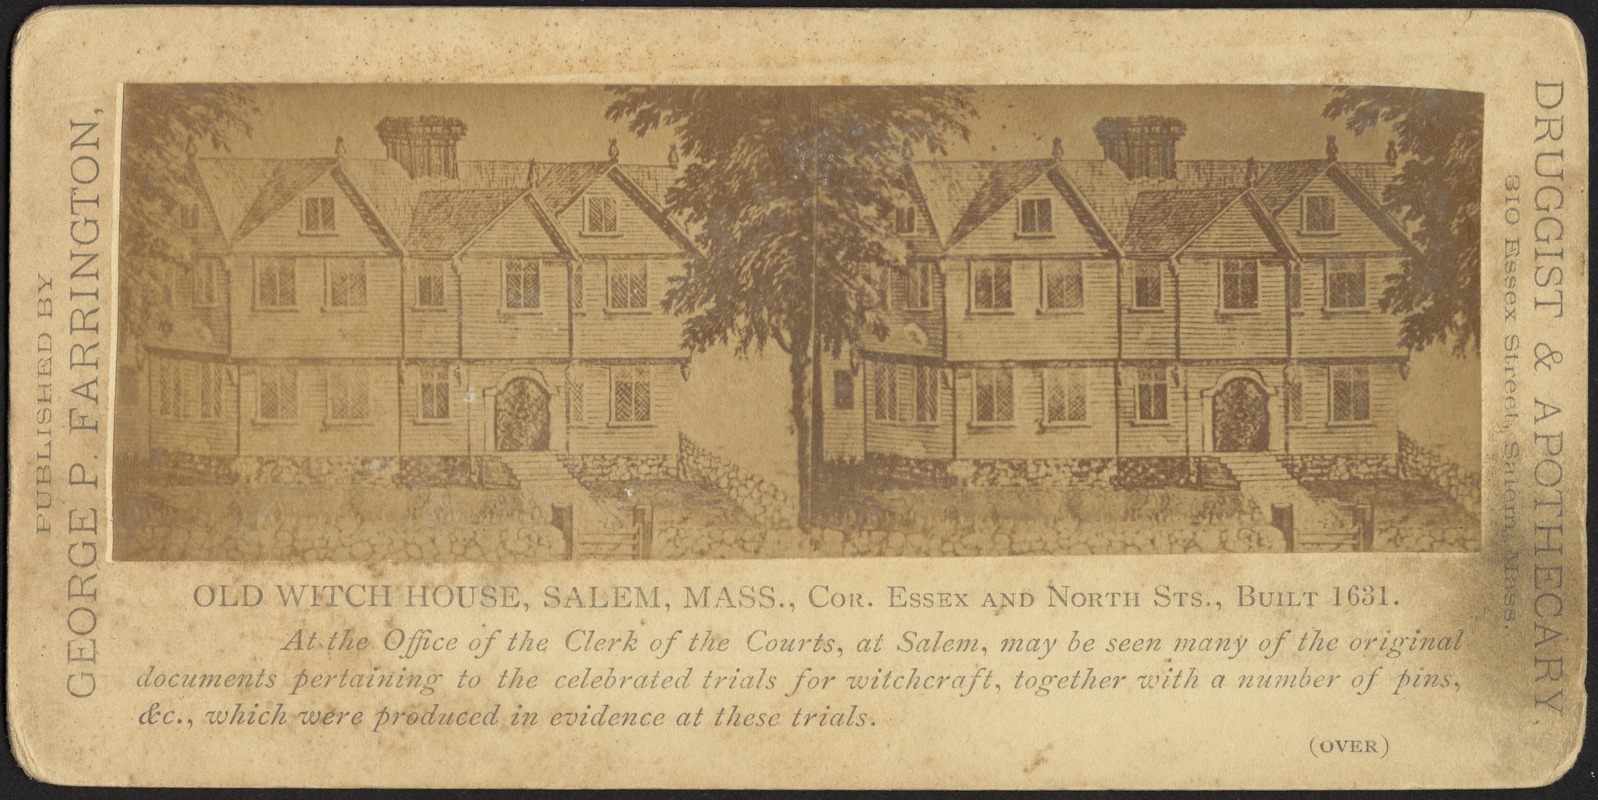 Old Witch House, Salem, Mass., cor. Essex and North Sts., built 1631